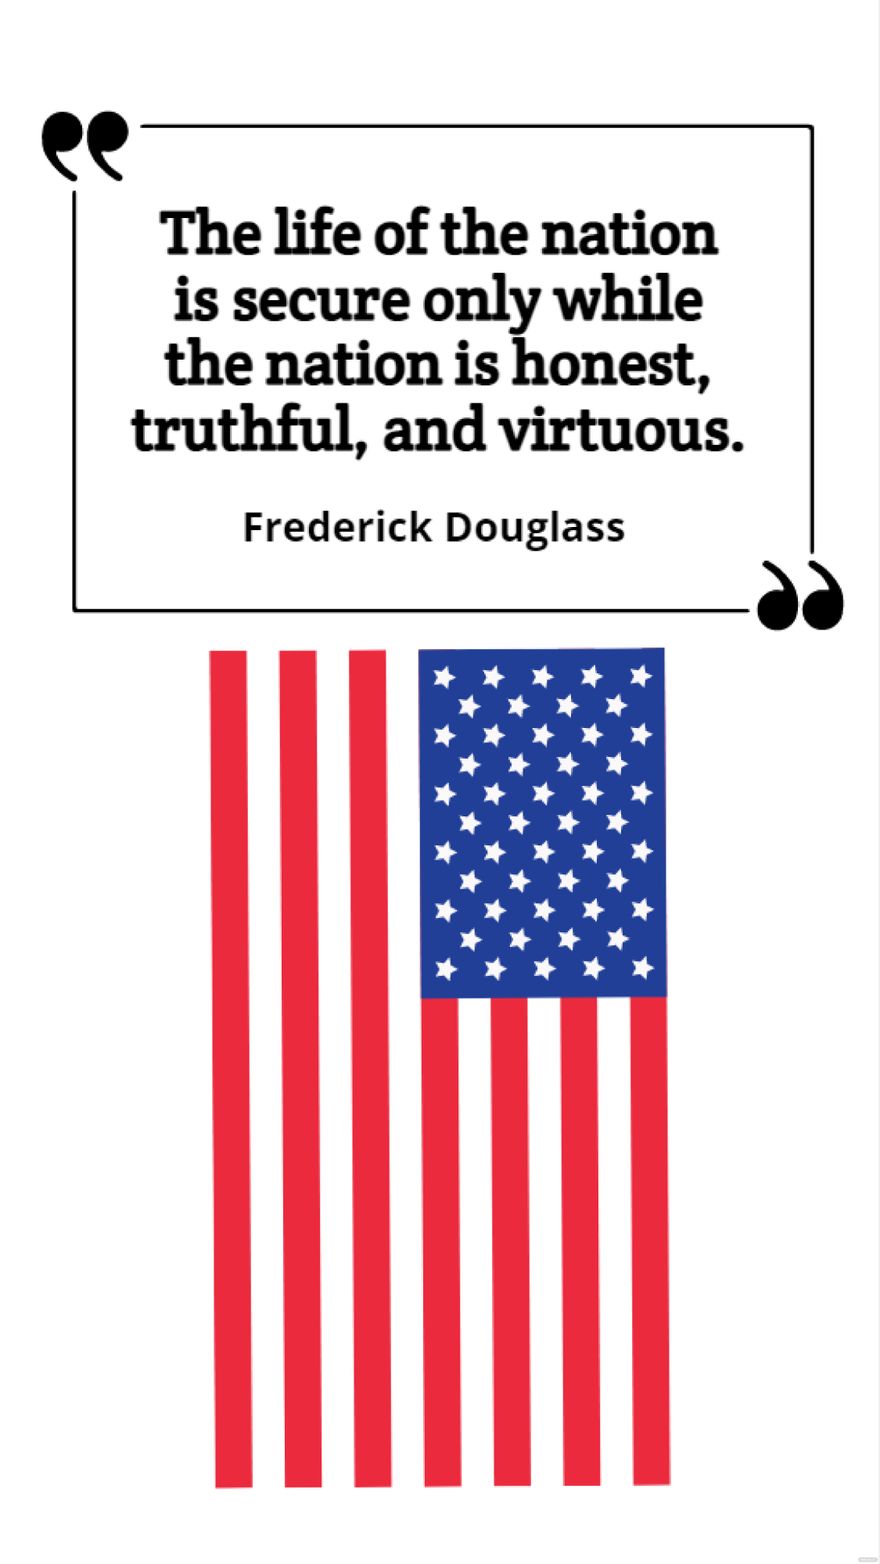 Frederick Douglass - The life of the nation is secure only while the nation is honest, truthful, and virtuous. in JPG